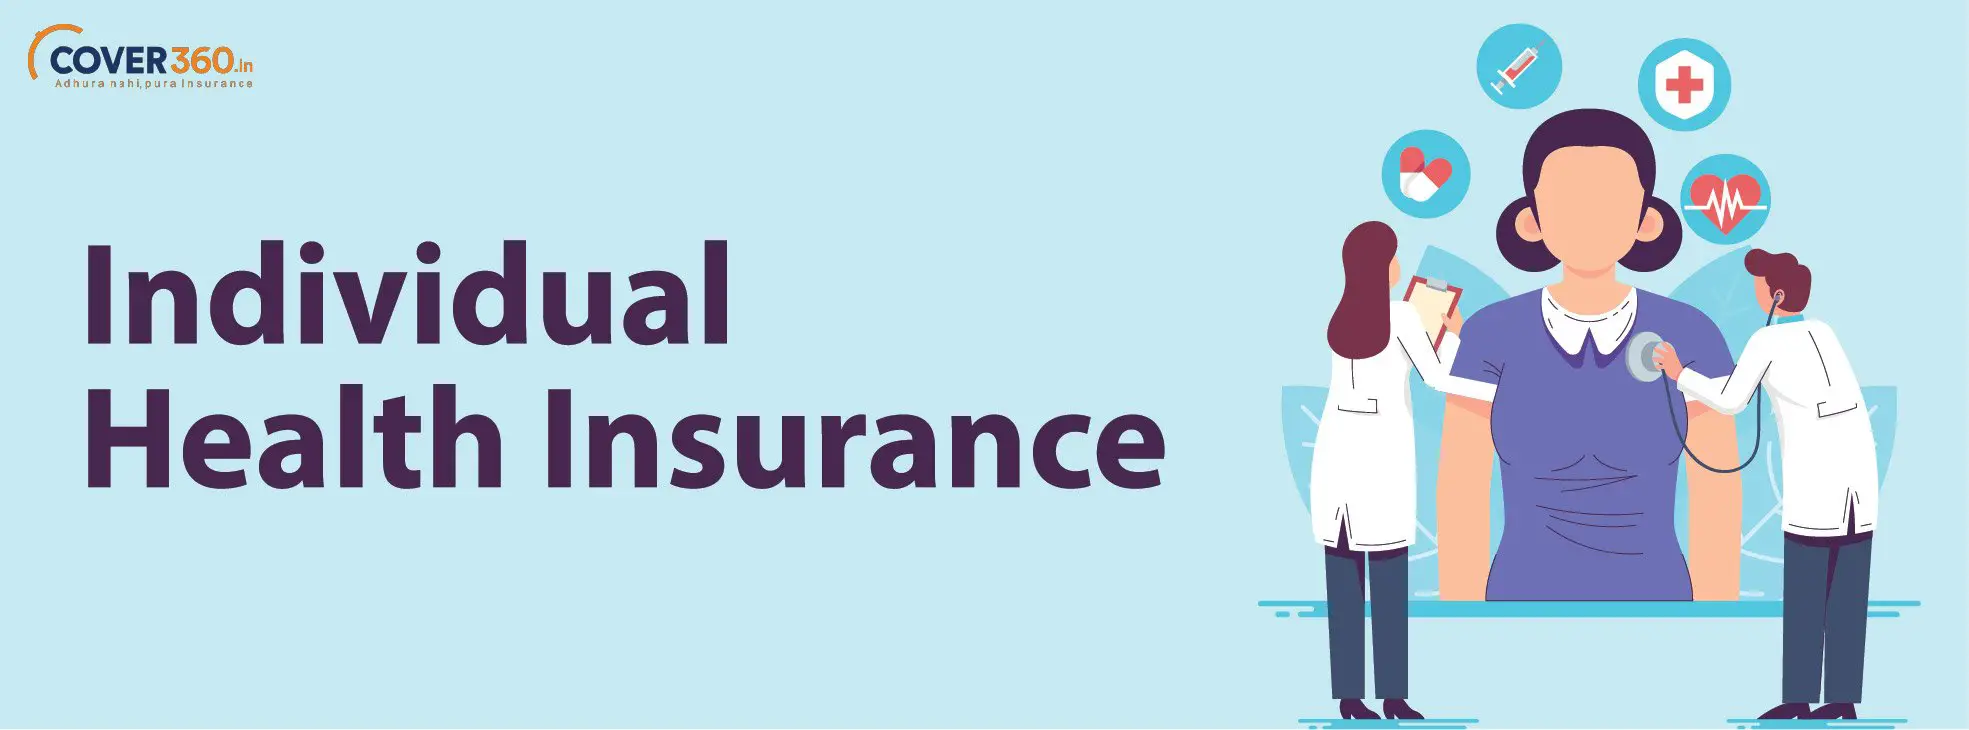 Best Features of Individual Health Insurance Plans